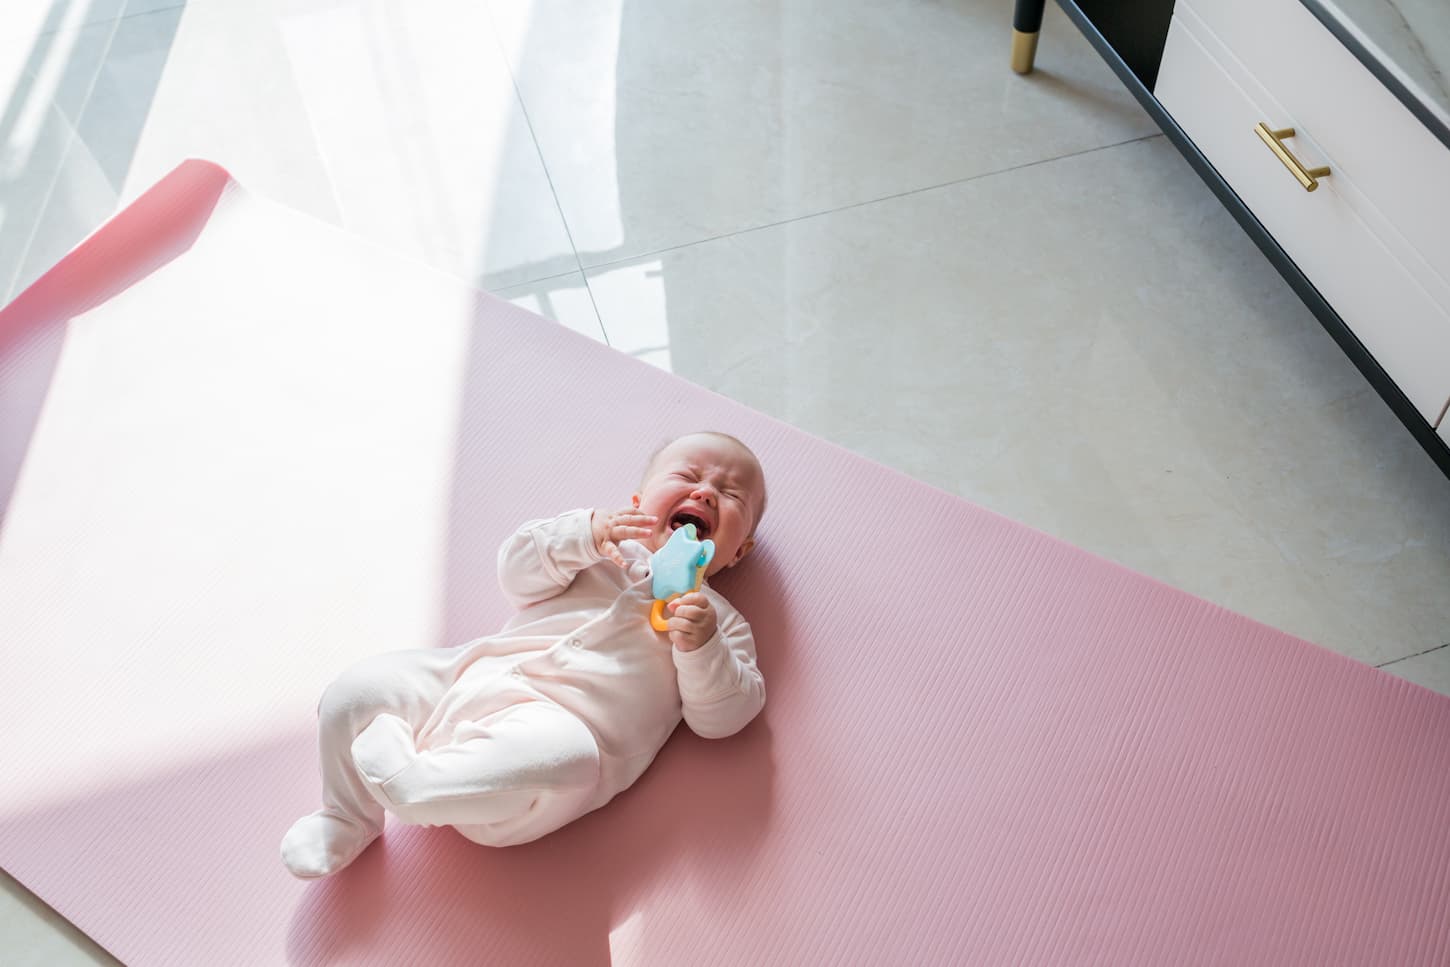 An image of a baby 5-6 months old crying in pain at home on pink mat.